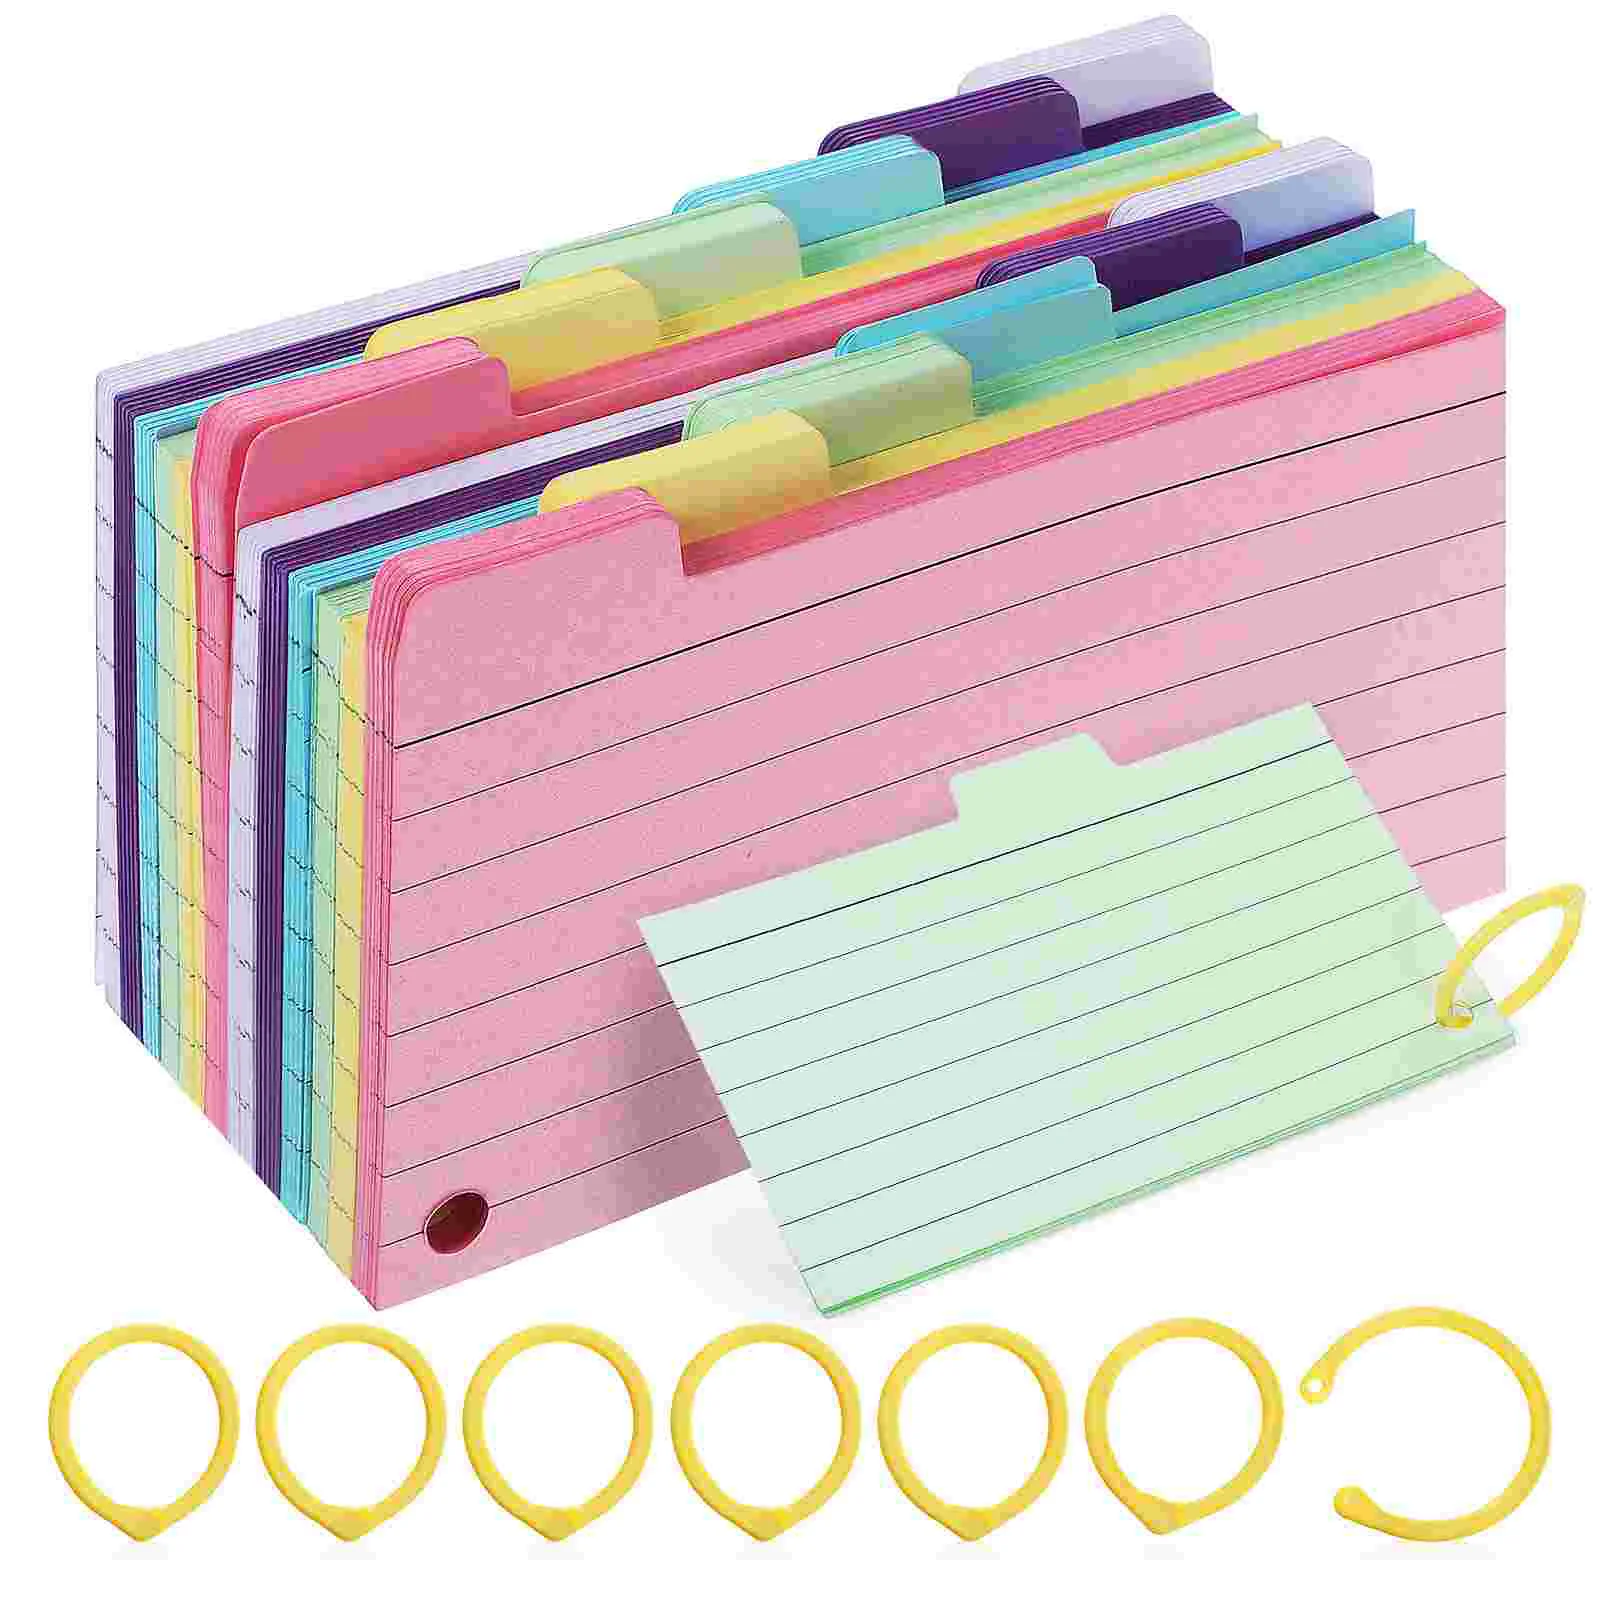 

450 Pcs Notebook Office Notepad Flash Cards Studying Student Pads Lining Lined Notepads Learning Paper Spiral Memo